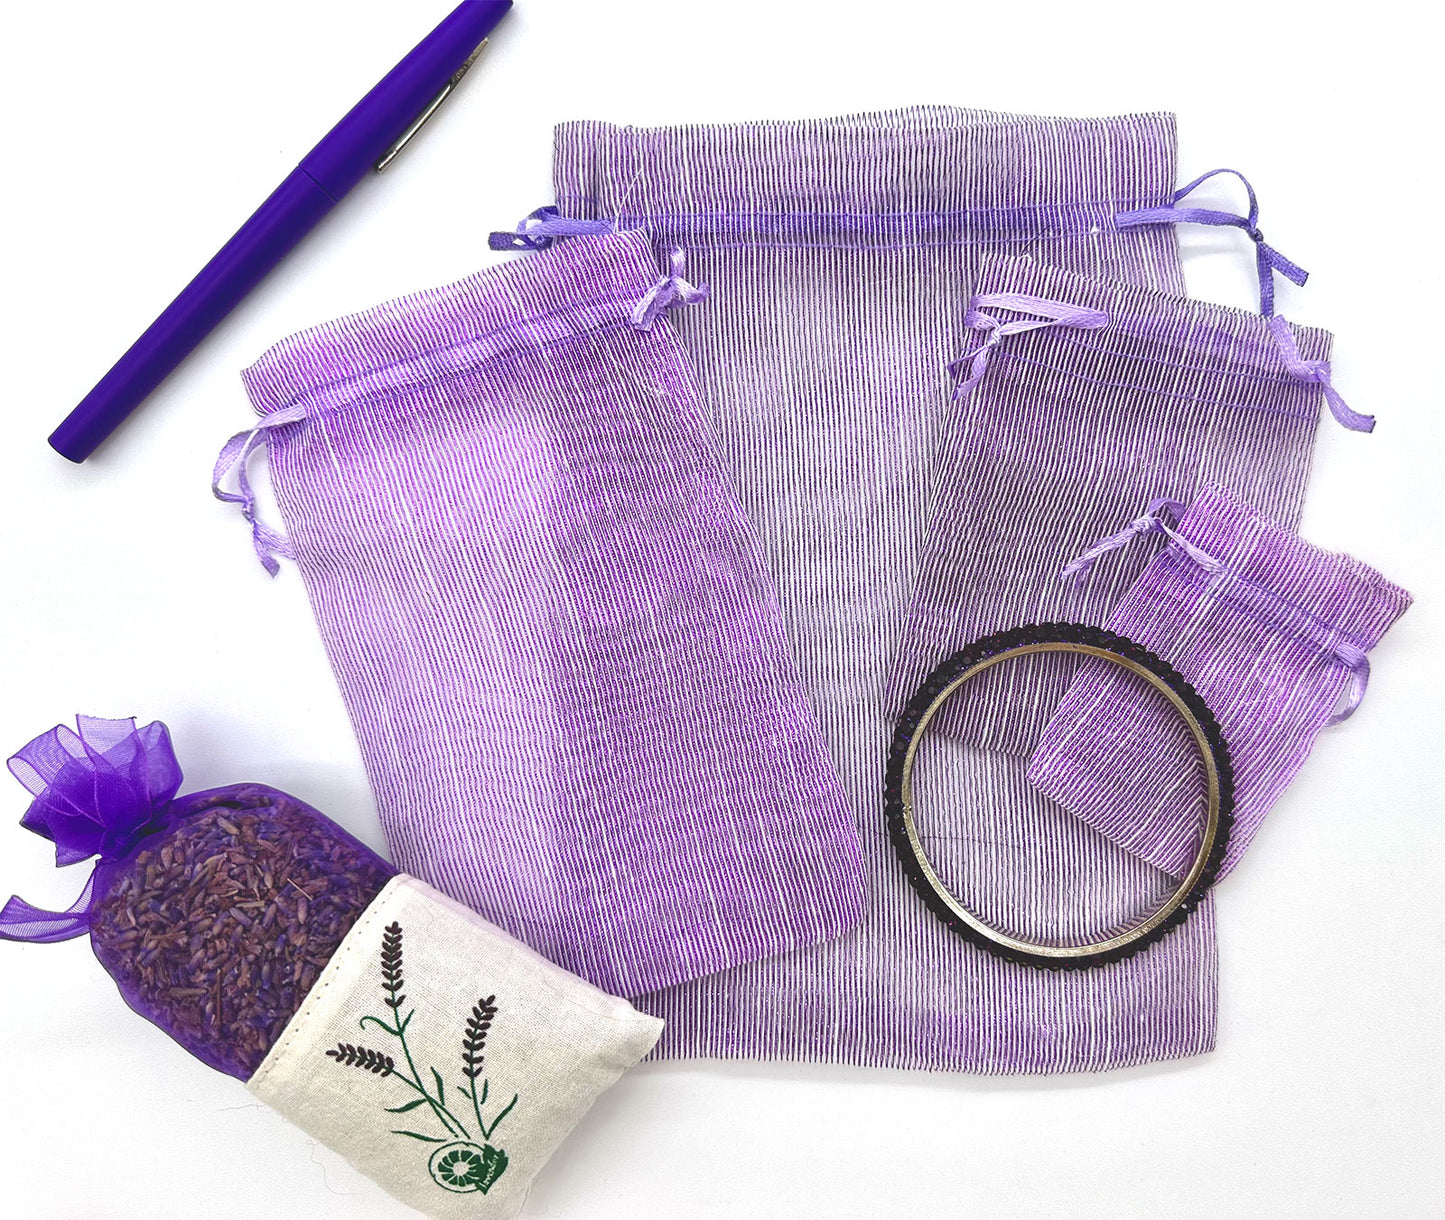 Purple Striped Weave Organza Drawstring Pouch Gift Bags